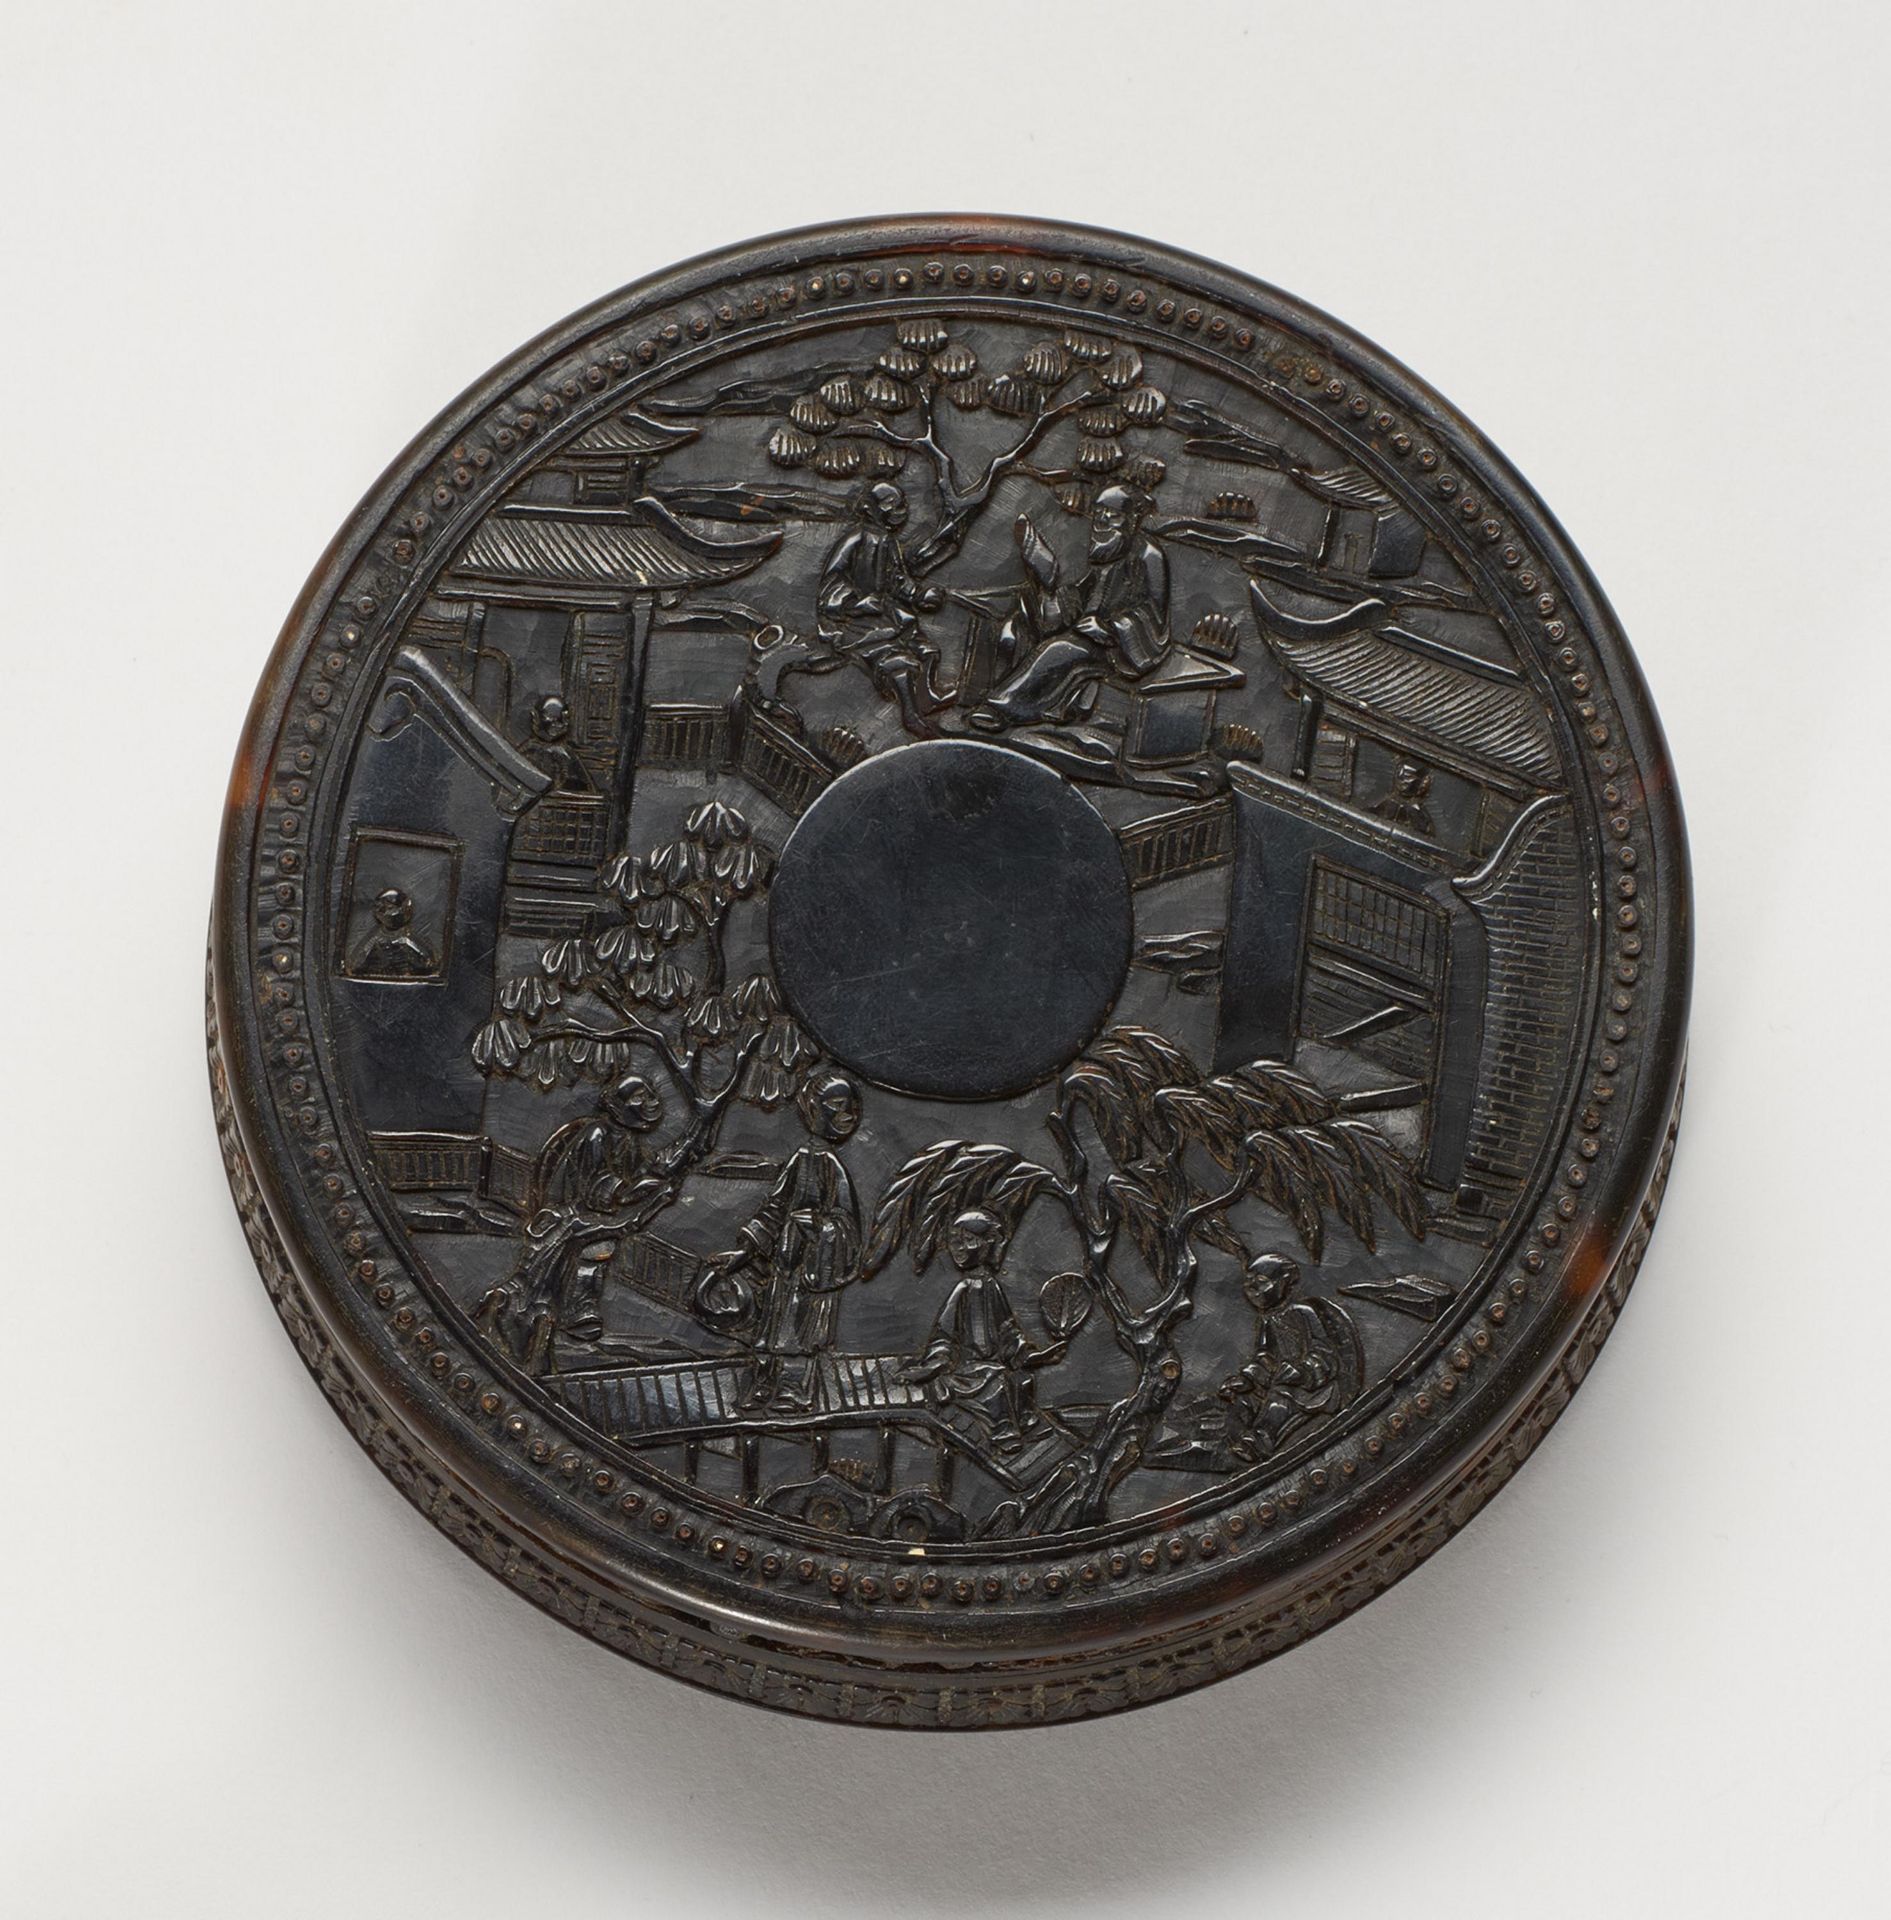 FINELY CARVED TORTOISE SHELL FRAGRANCE BOX WITH GENRE SCENES IN FRONT OF A CITY. Origin: China. - Bild 2 aus 2